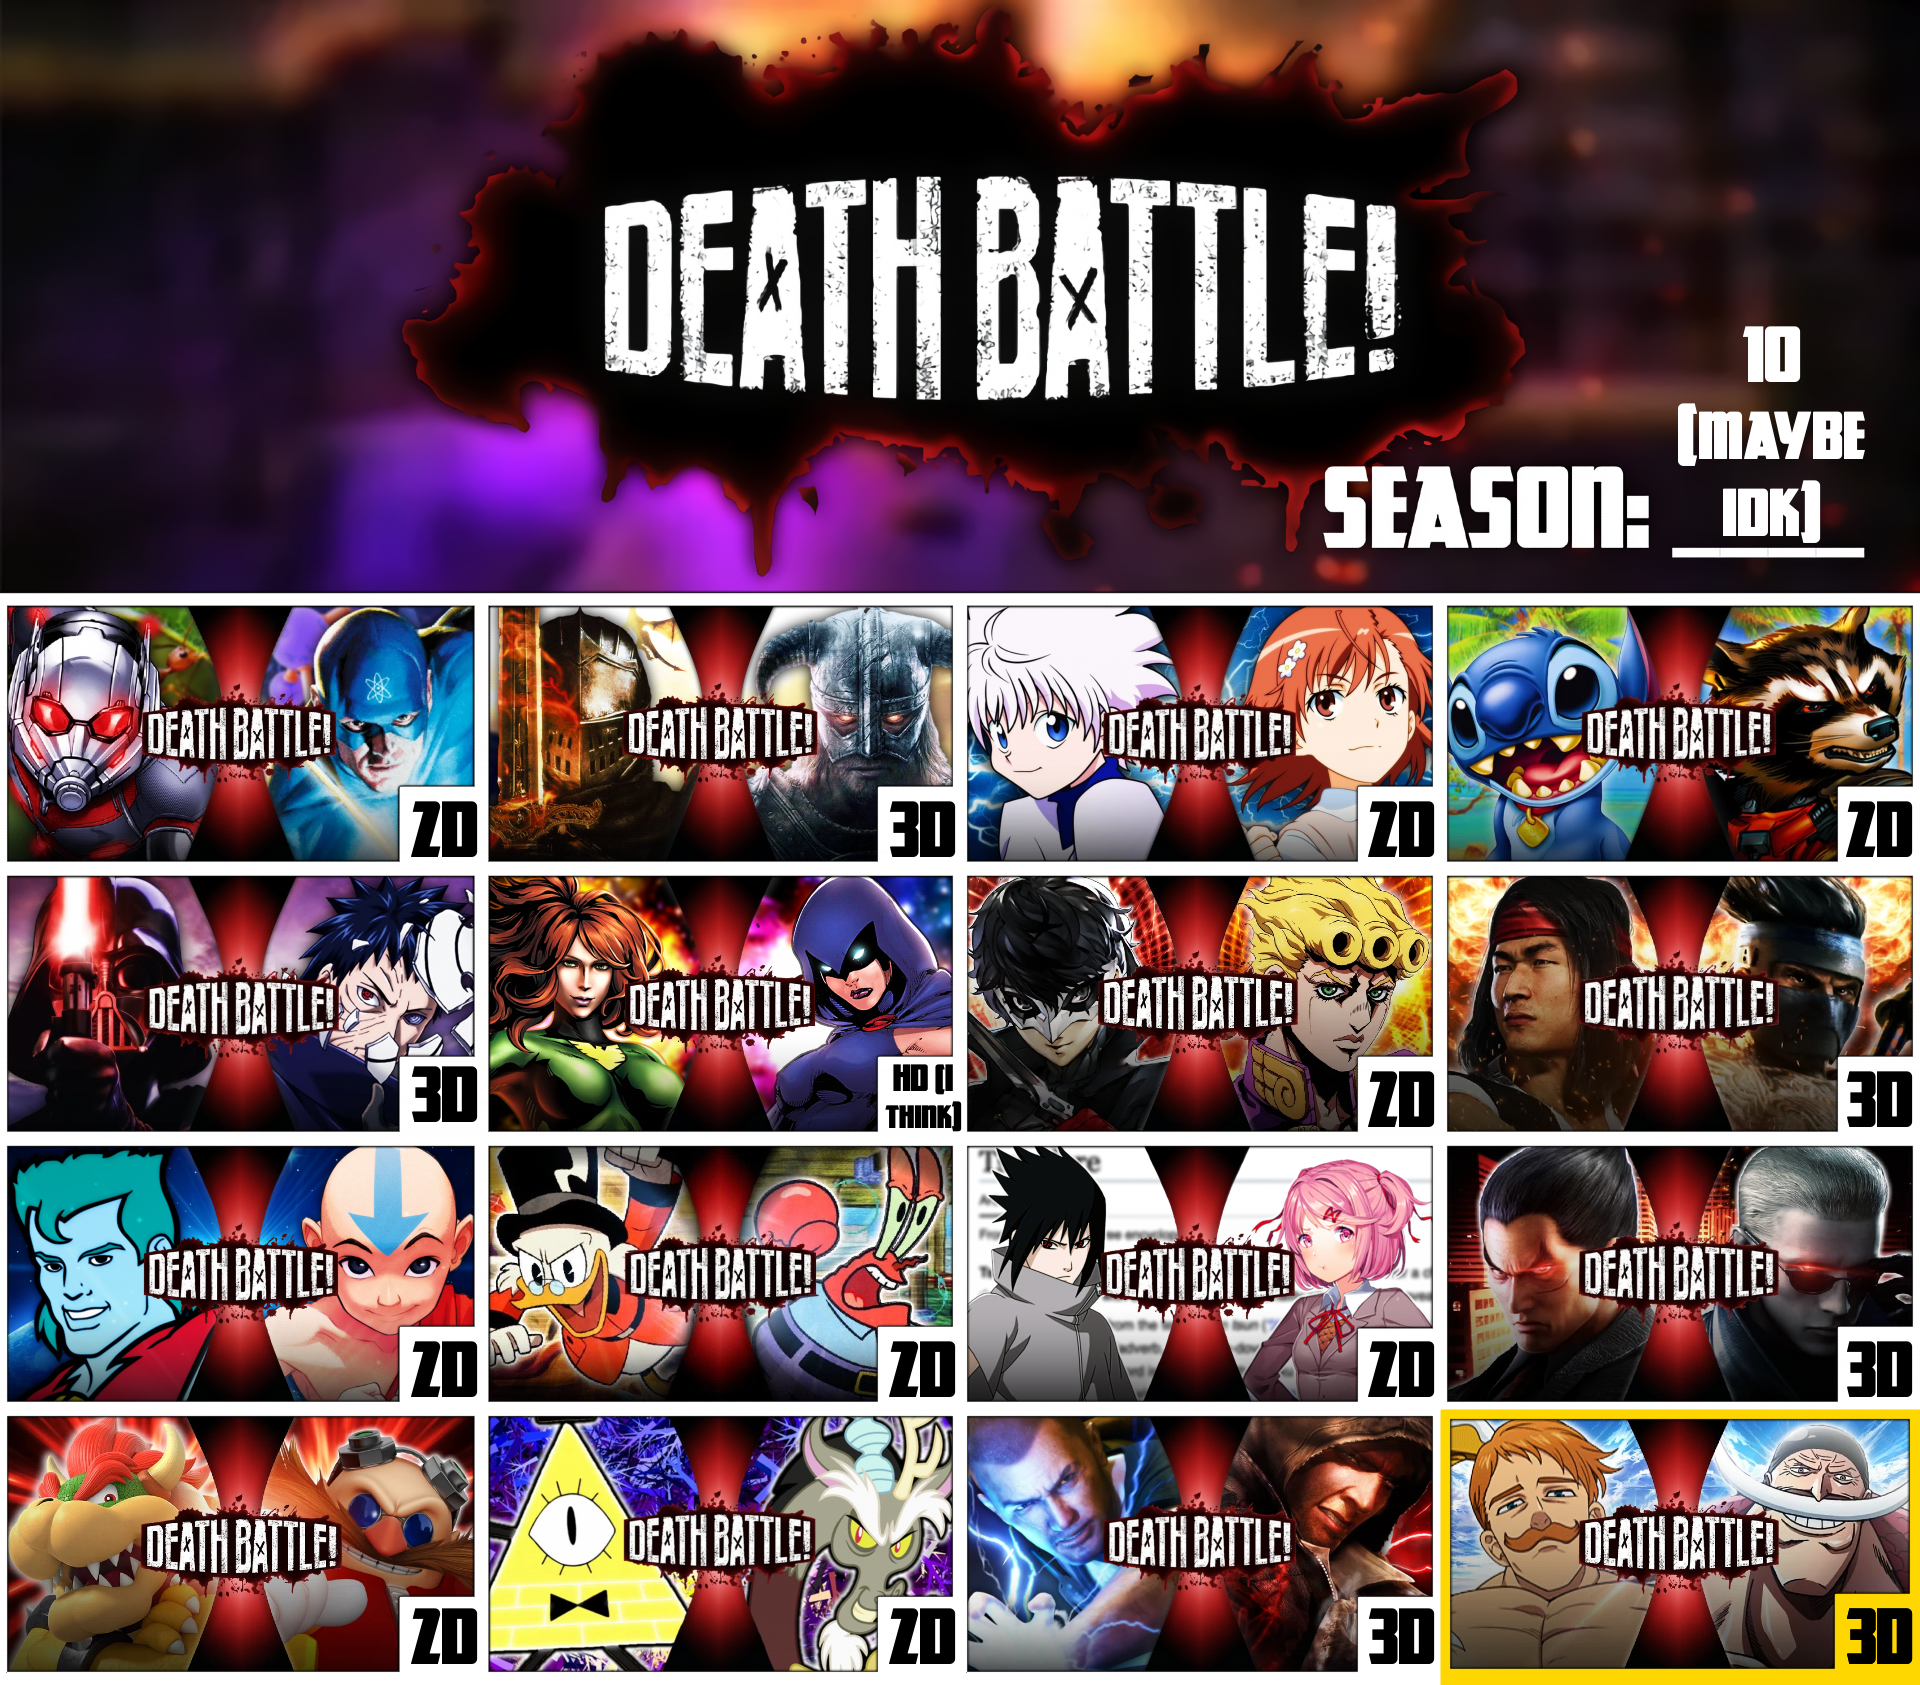 My predictions on the death rate of some characters on Season 5